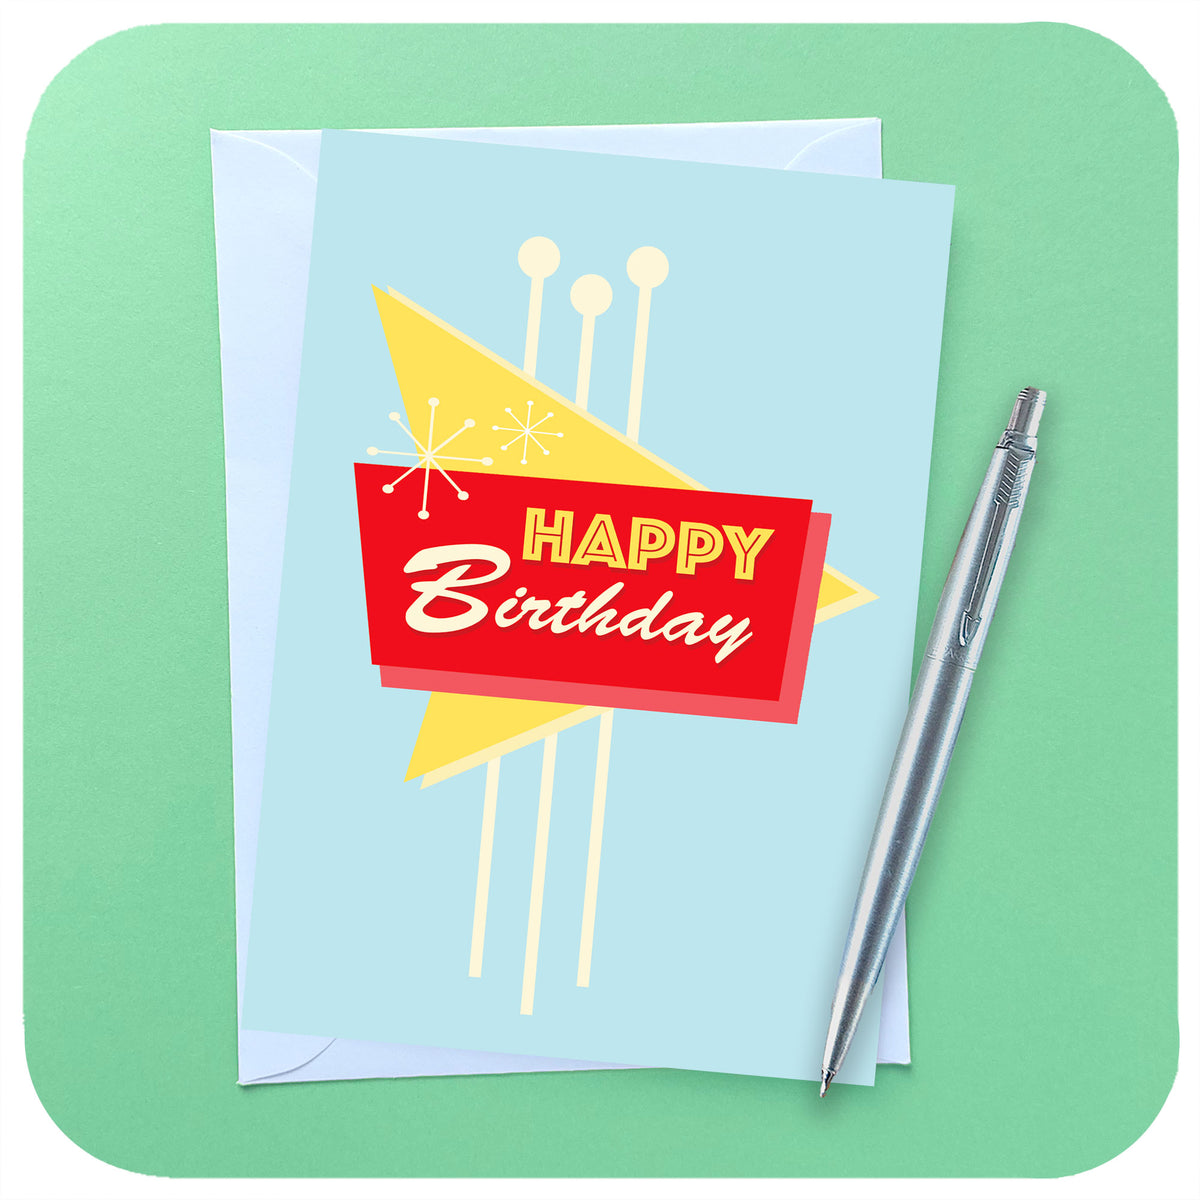 Happy Birthday Card in Vintage Las Vegas Style, with white envelope and silver parker pen on a light green background | The Inkabilly Emporium